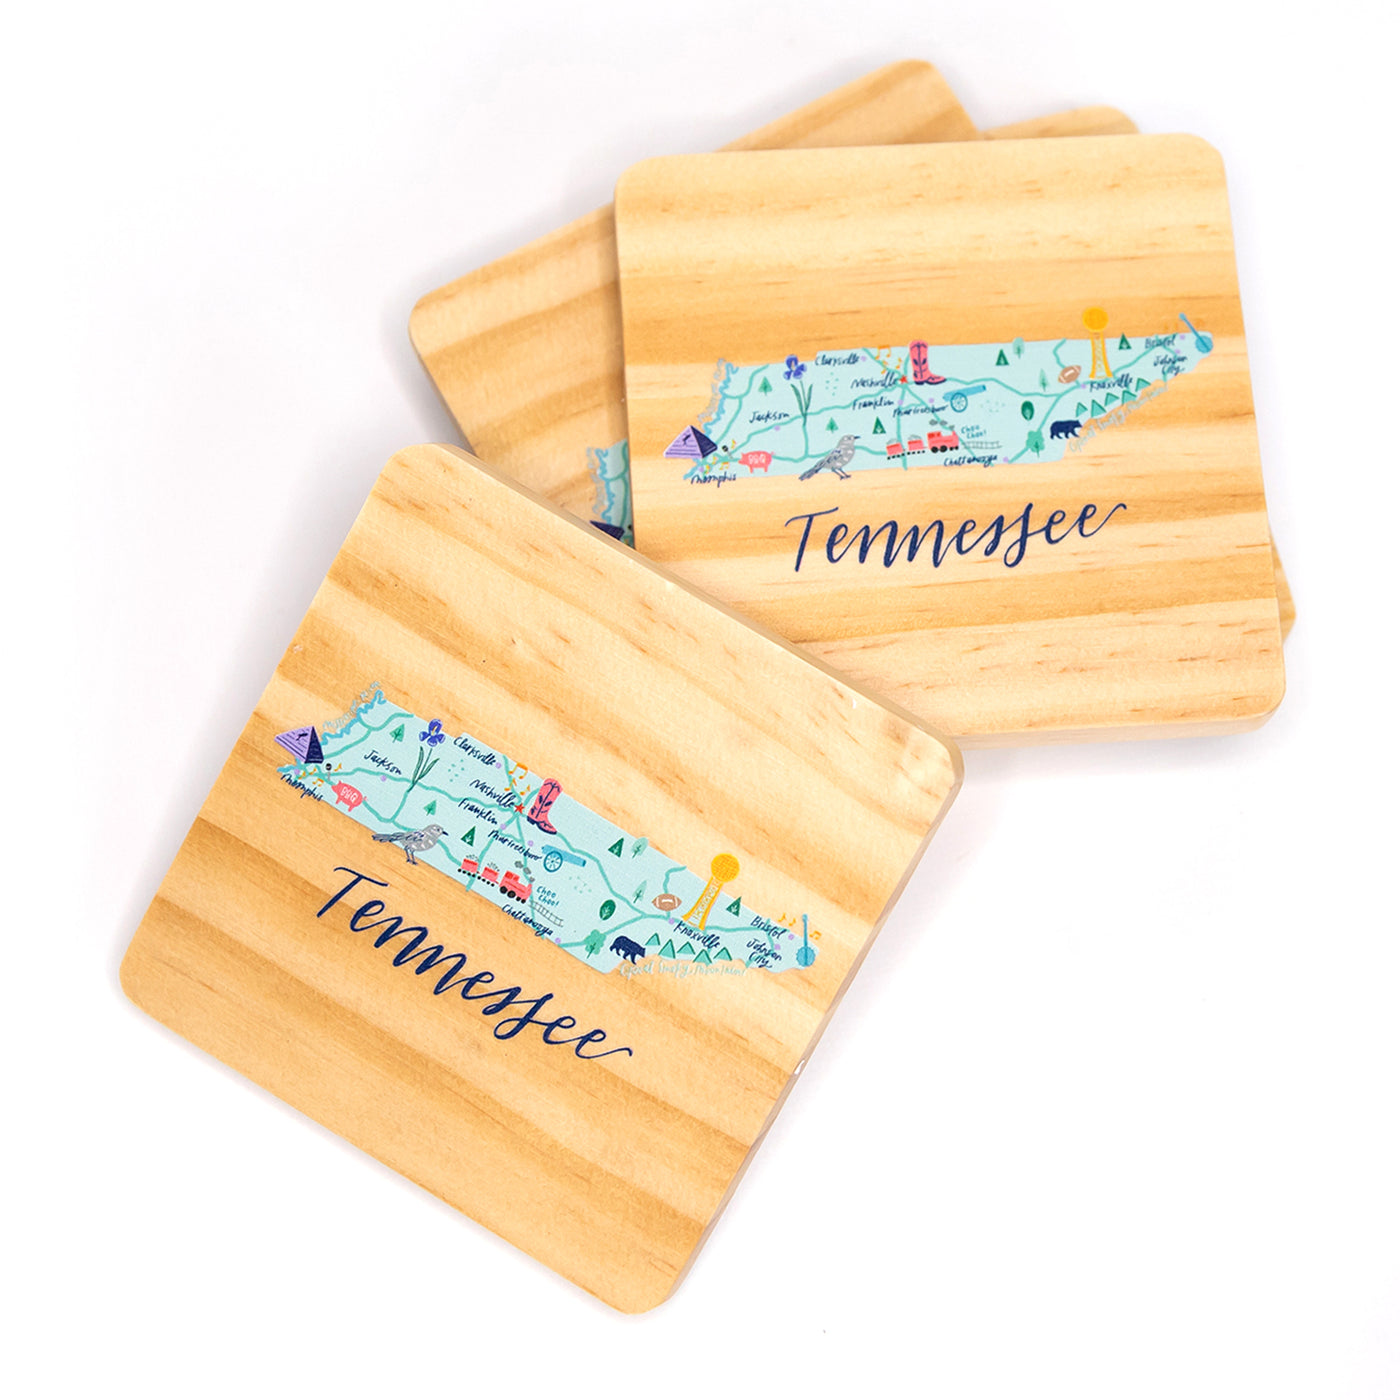 Tennessee Coasters - Mary Square, LLC